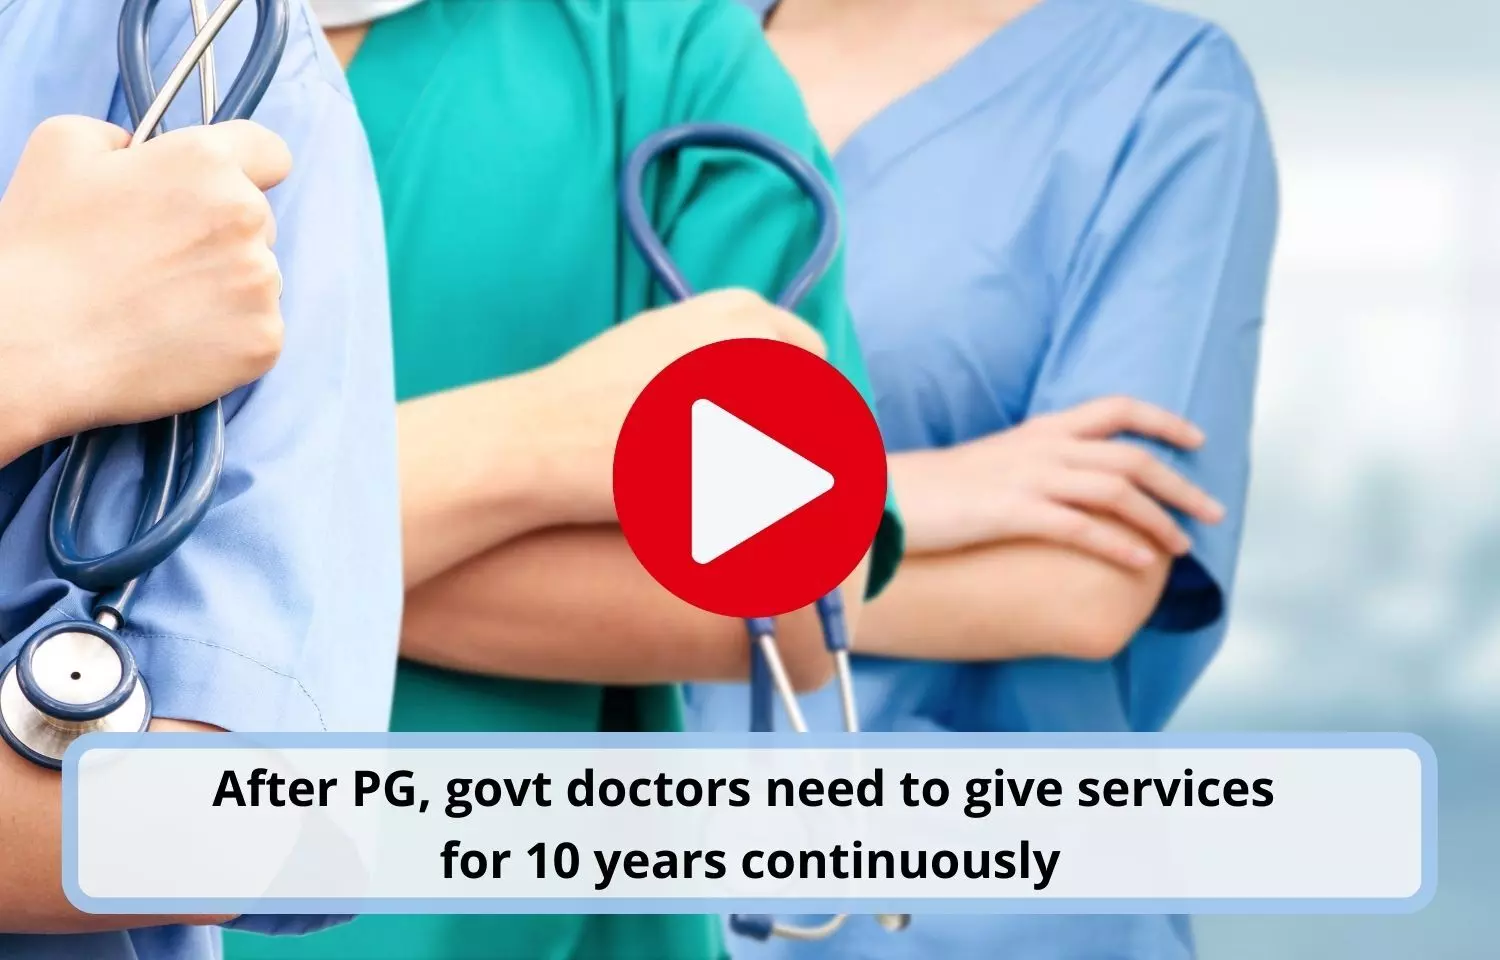 Postgraduate Government medicos mandatory to give 10 years of services continuously